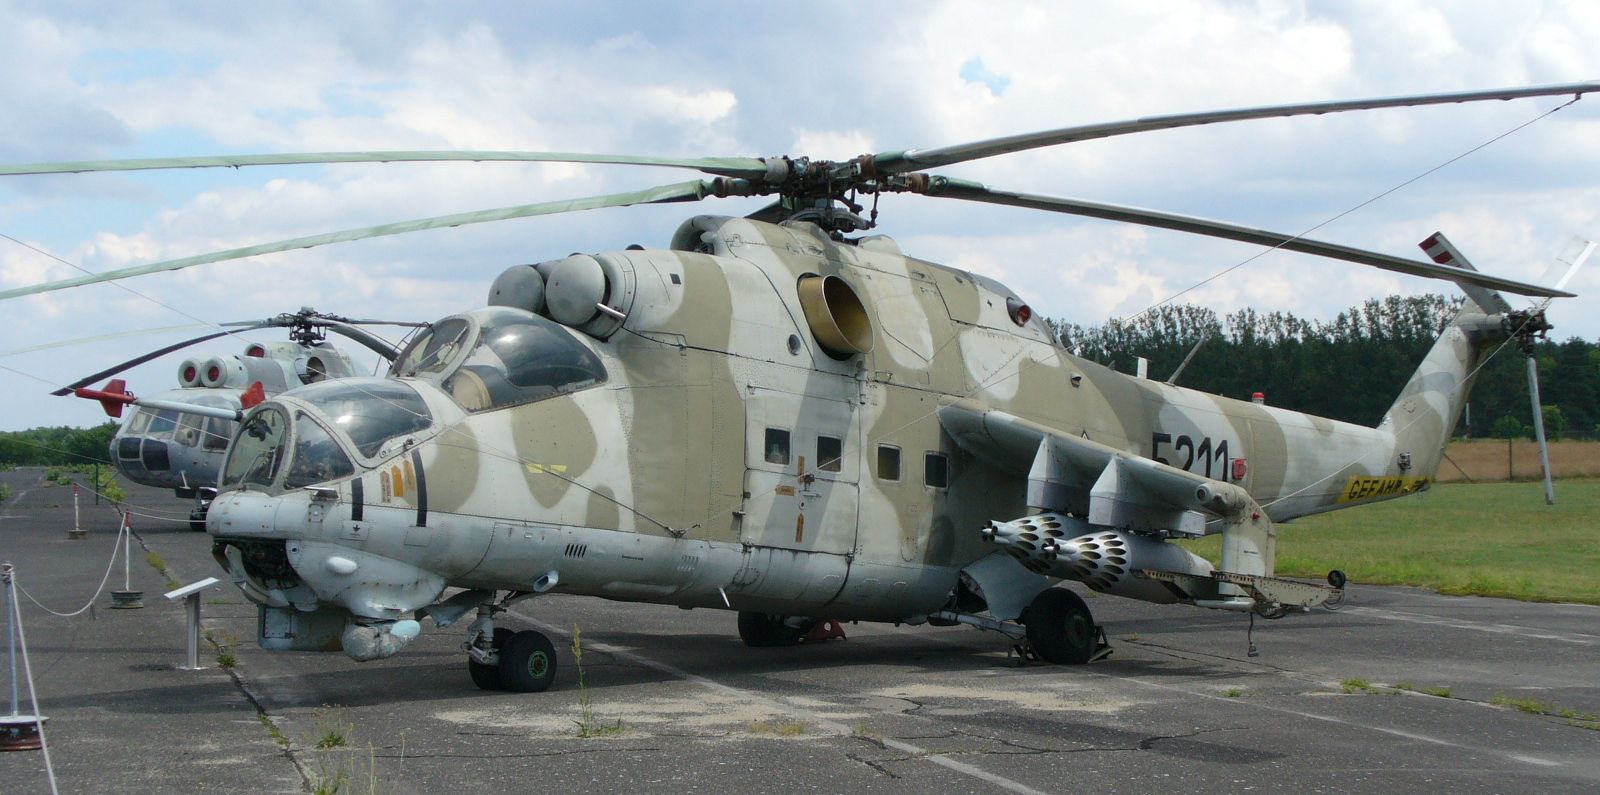 Mi-24D_Hind_Attack_Helicopter_%28Berlin%29.jpg